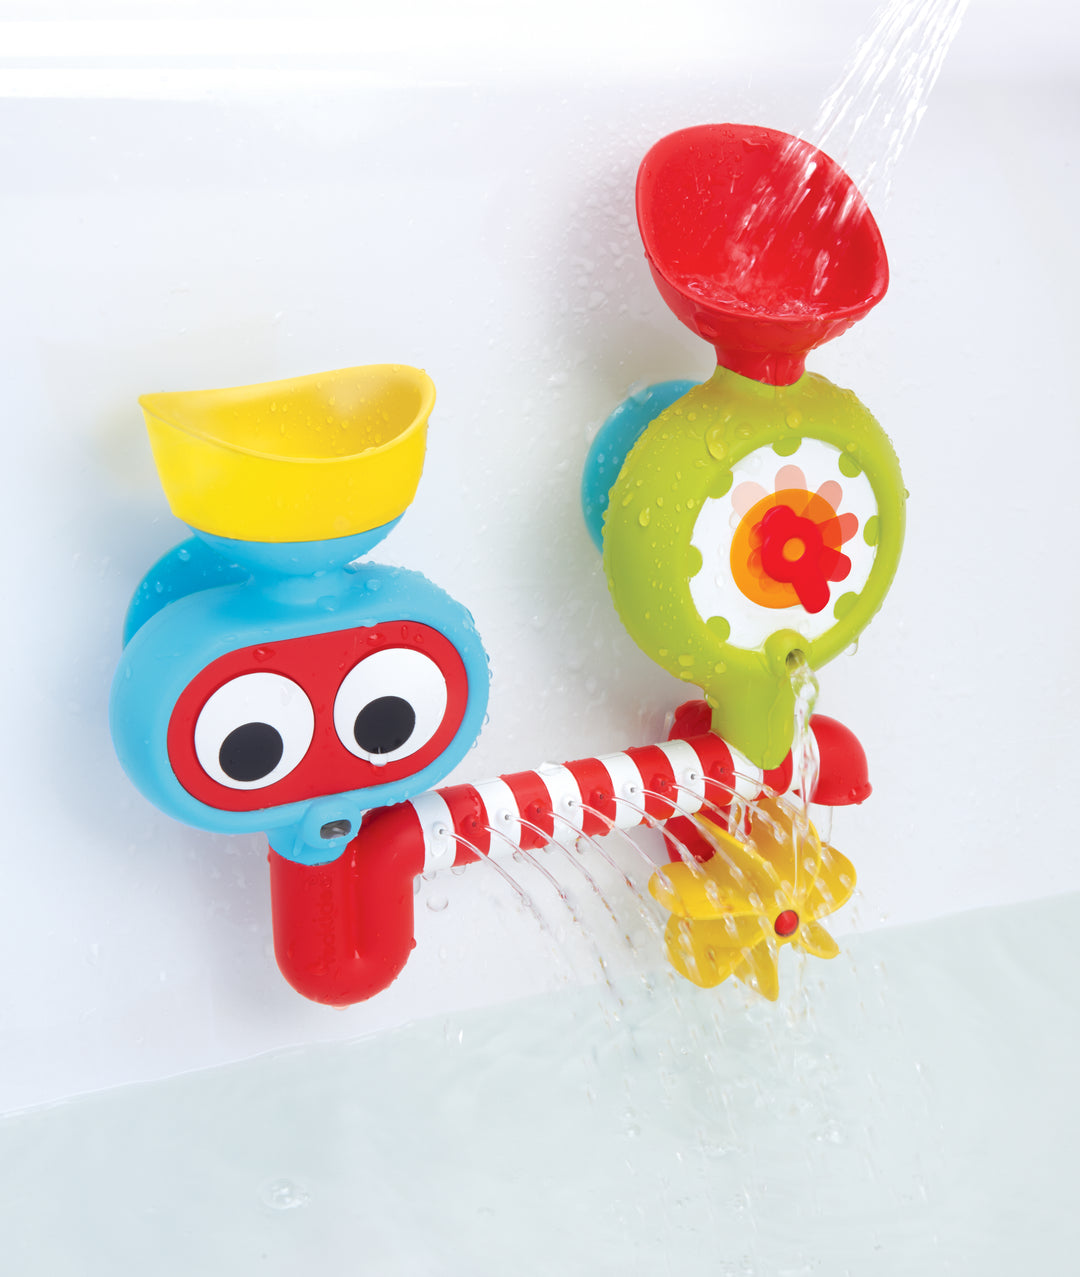 Yookidoo Easy Grip Battery Operated Submarine Spray Station Baby Kids Bath Toy